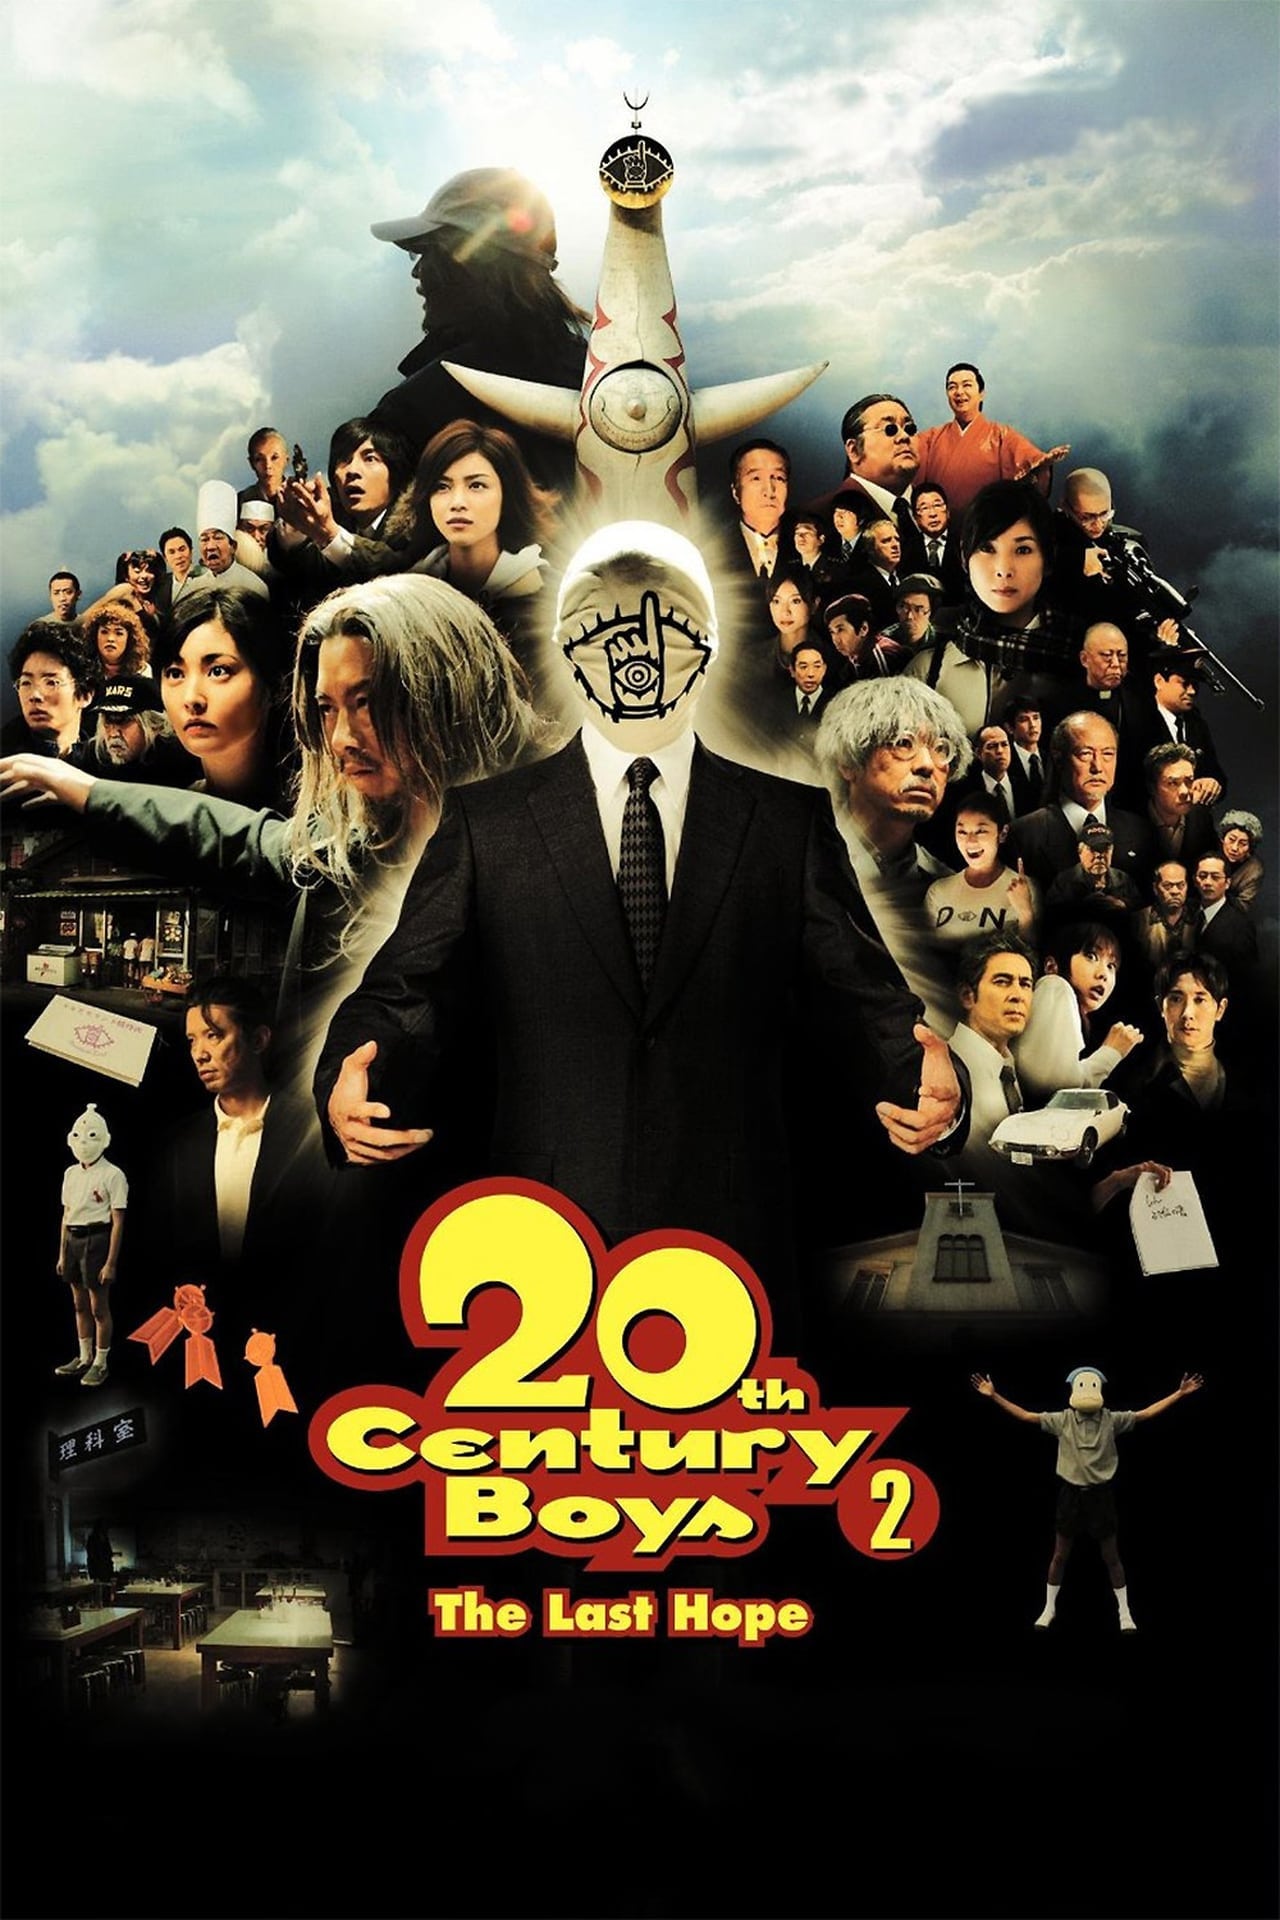 20th Century Boys - Chapter 2: The Last Hope (2009)